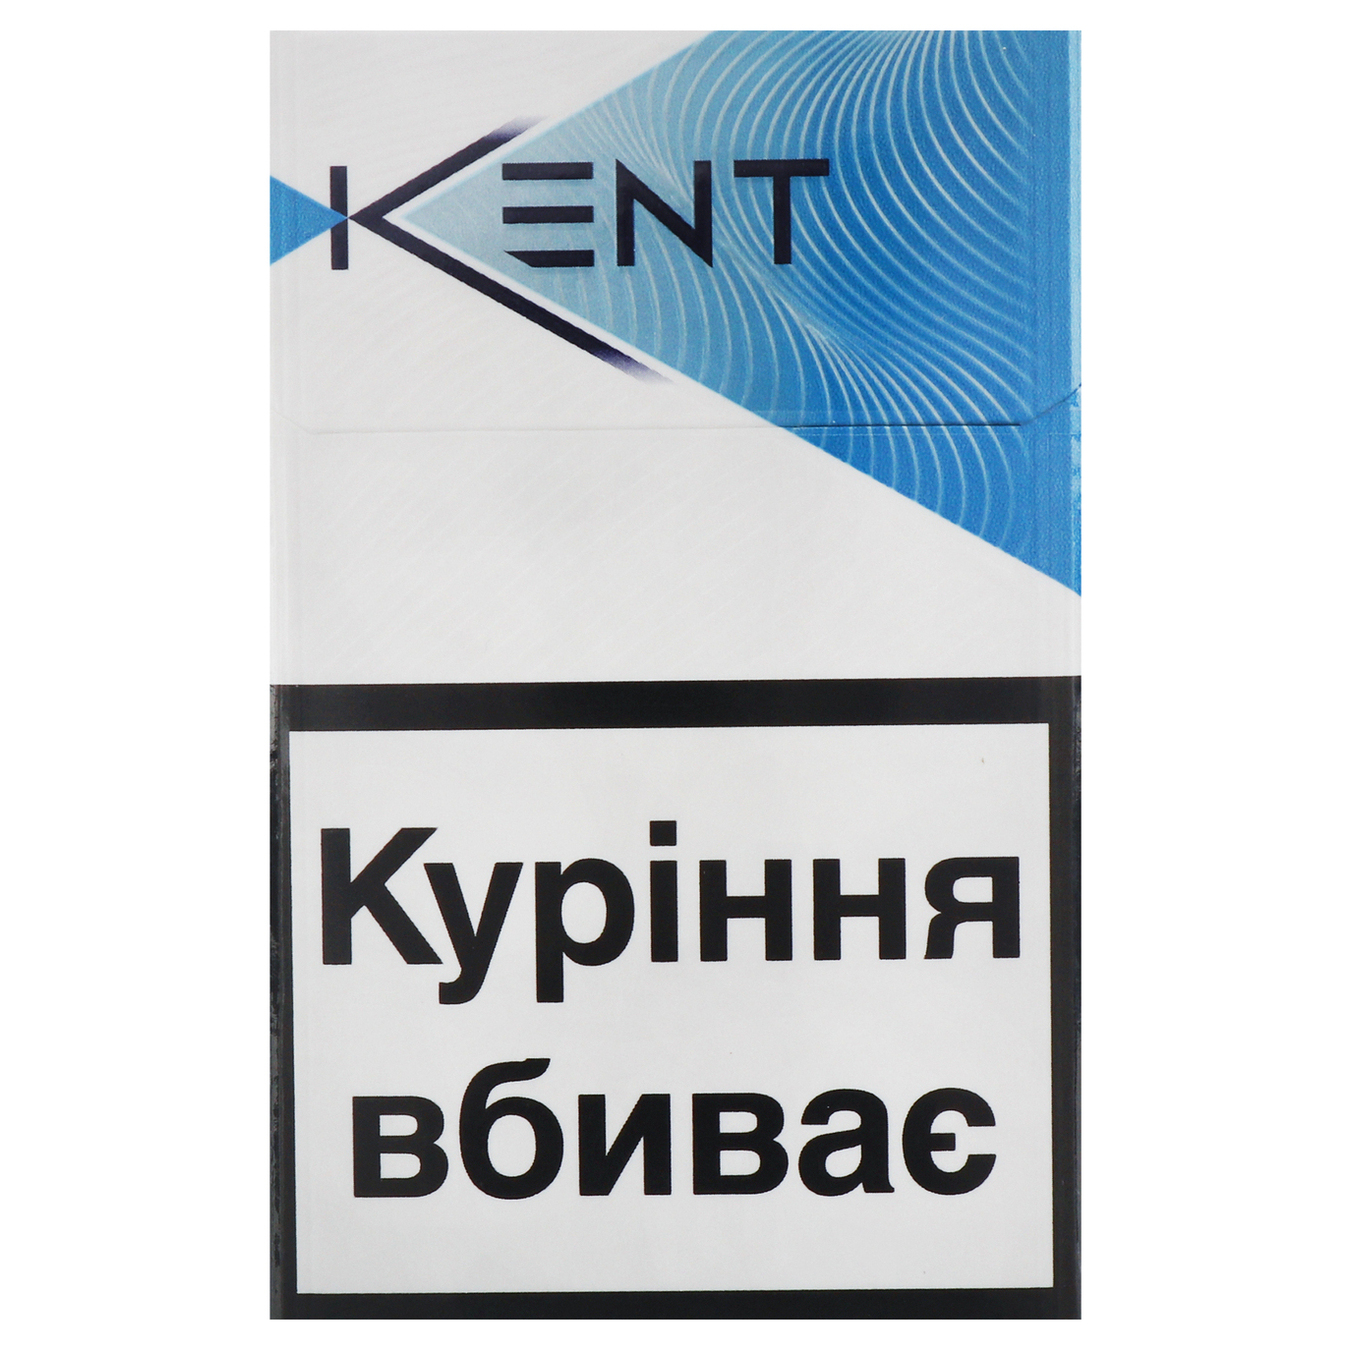 Kent HD Spectra Cigarettes 20 pcs (the price is indicated without excise tax)